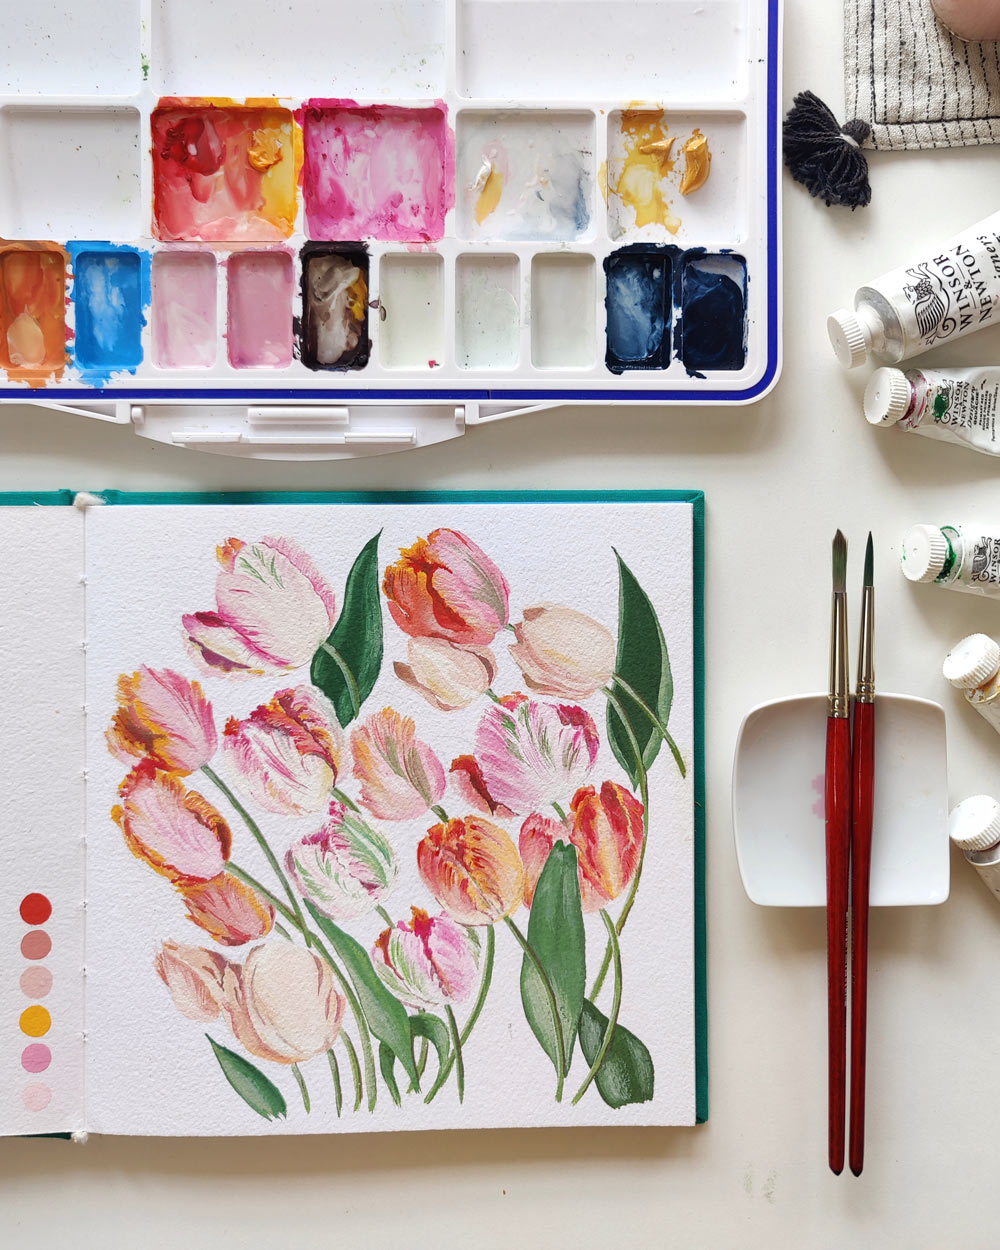 Painting Tulips: Real-Time Gouache Painting Process Video